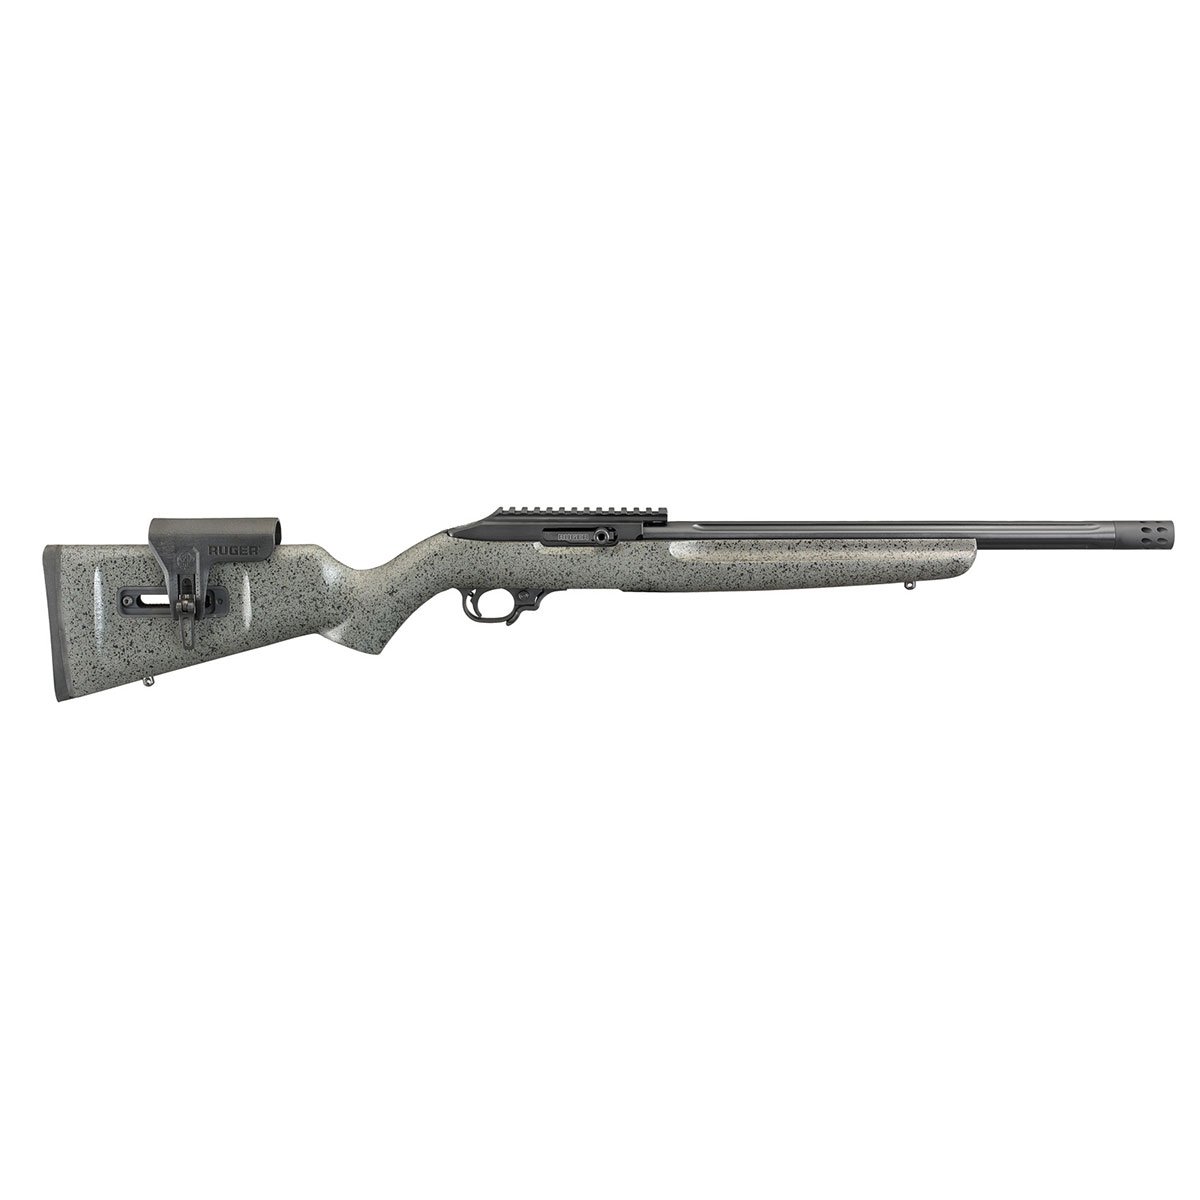 RUGER - 10/22 COMPETITION 22 LONG RIFLE SEMI-AUTO RIFLE